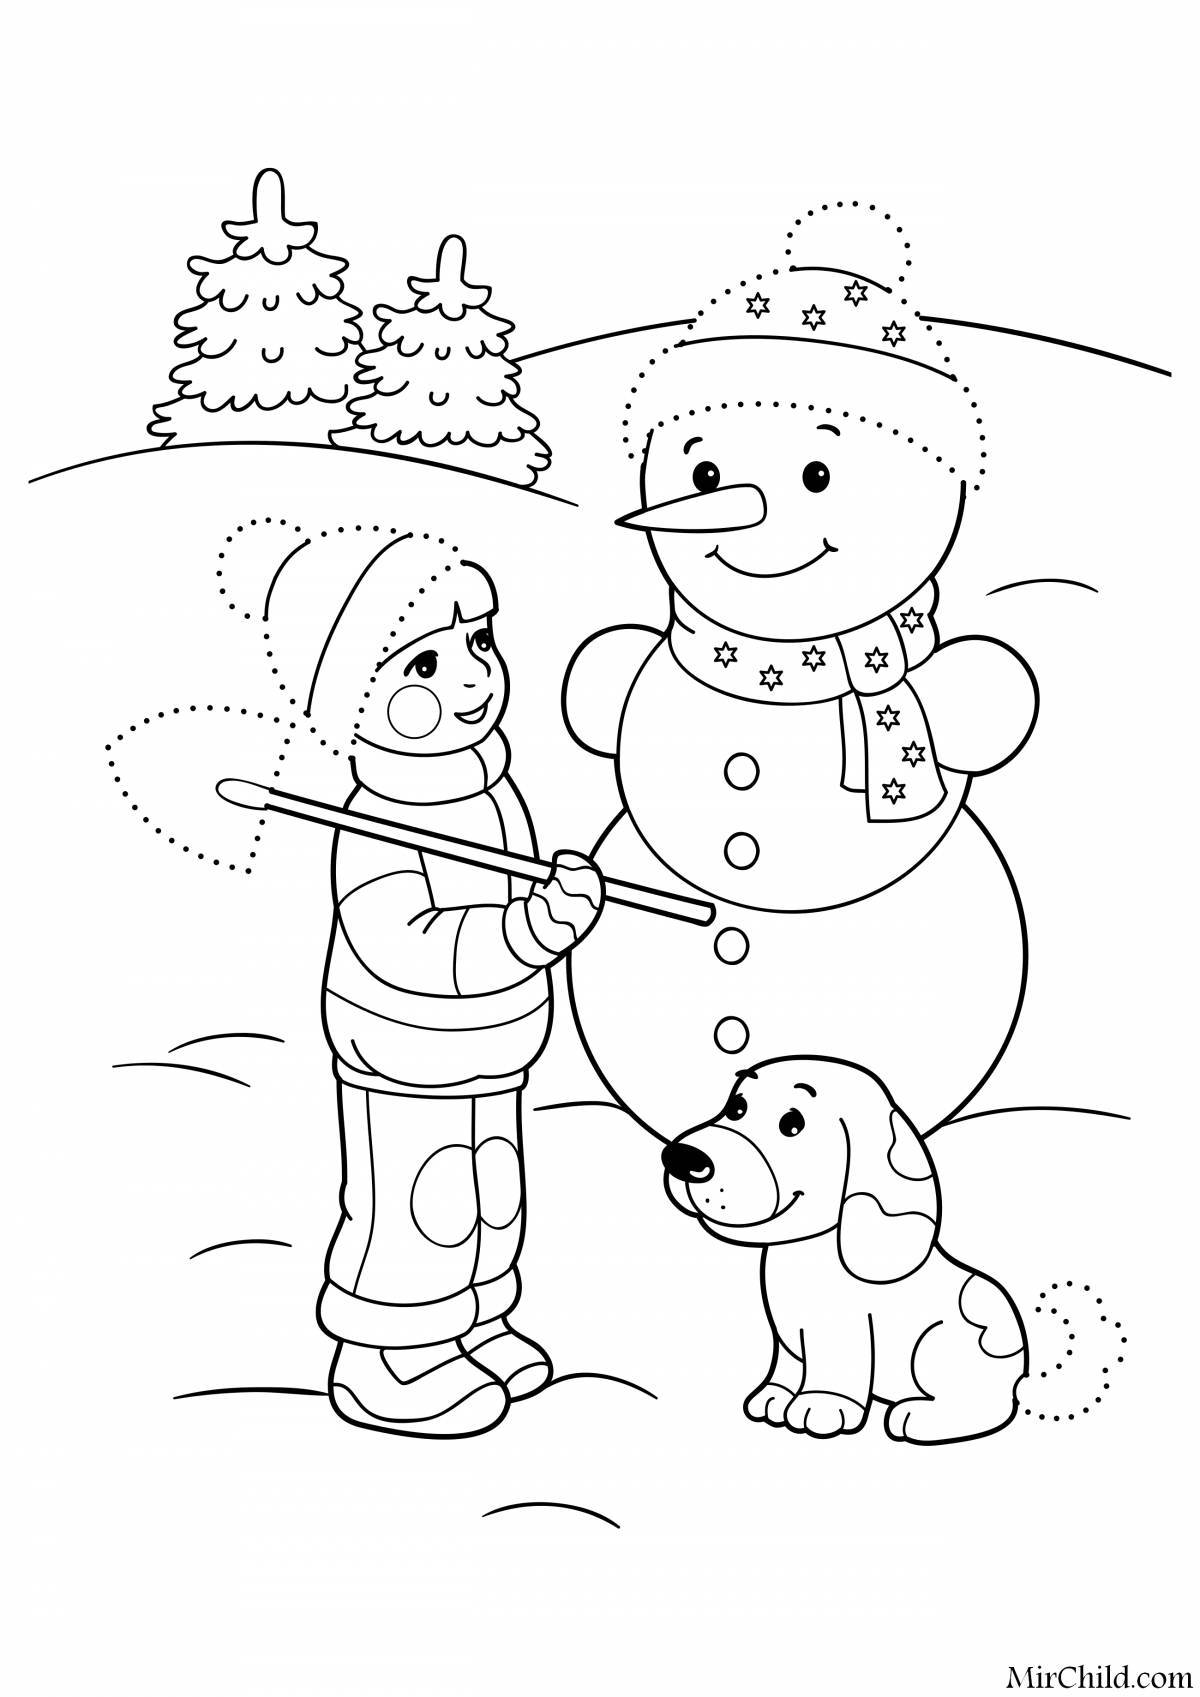 Radiant coloring winter for children 6-7 years old